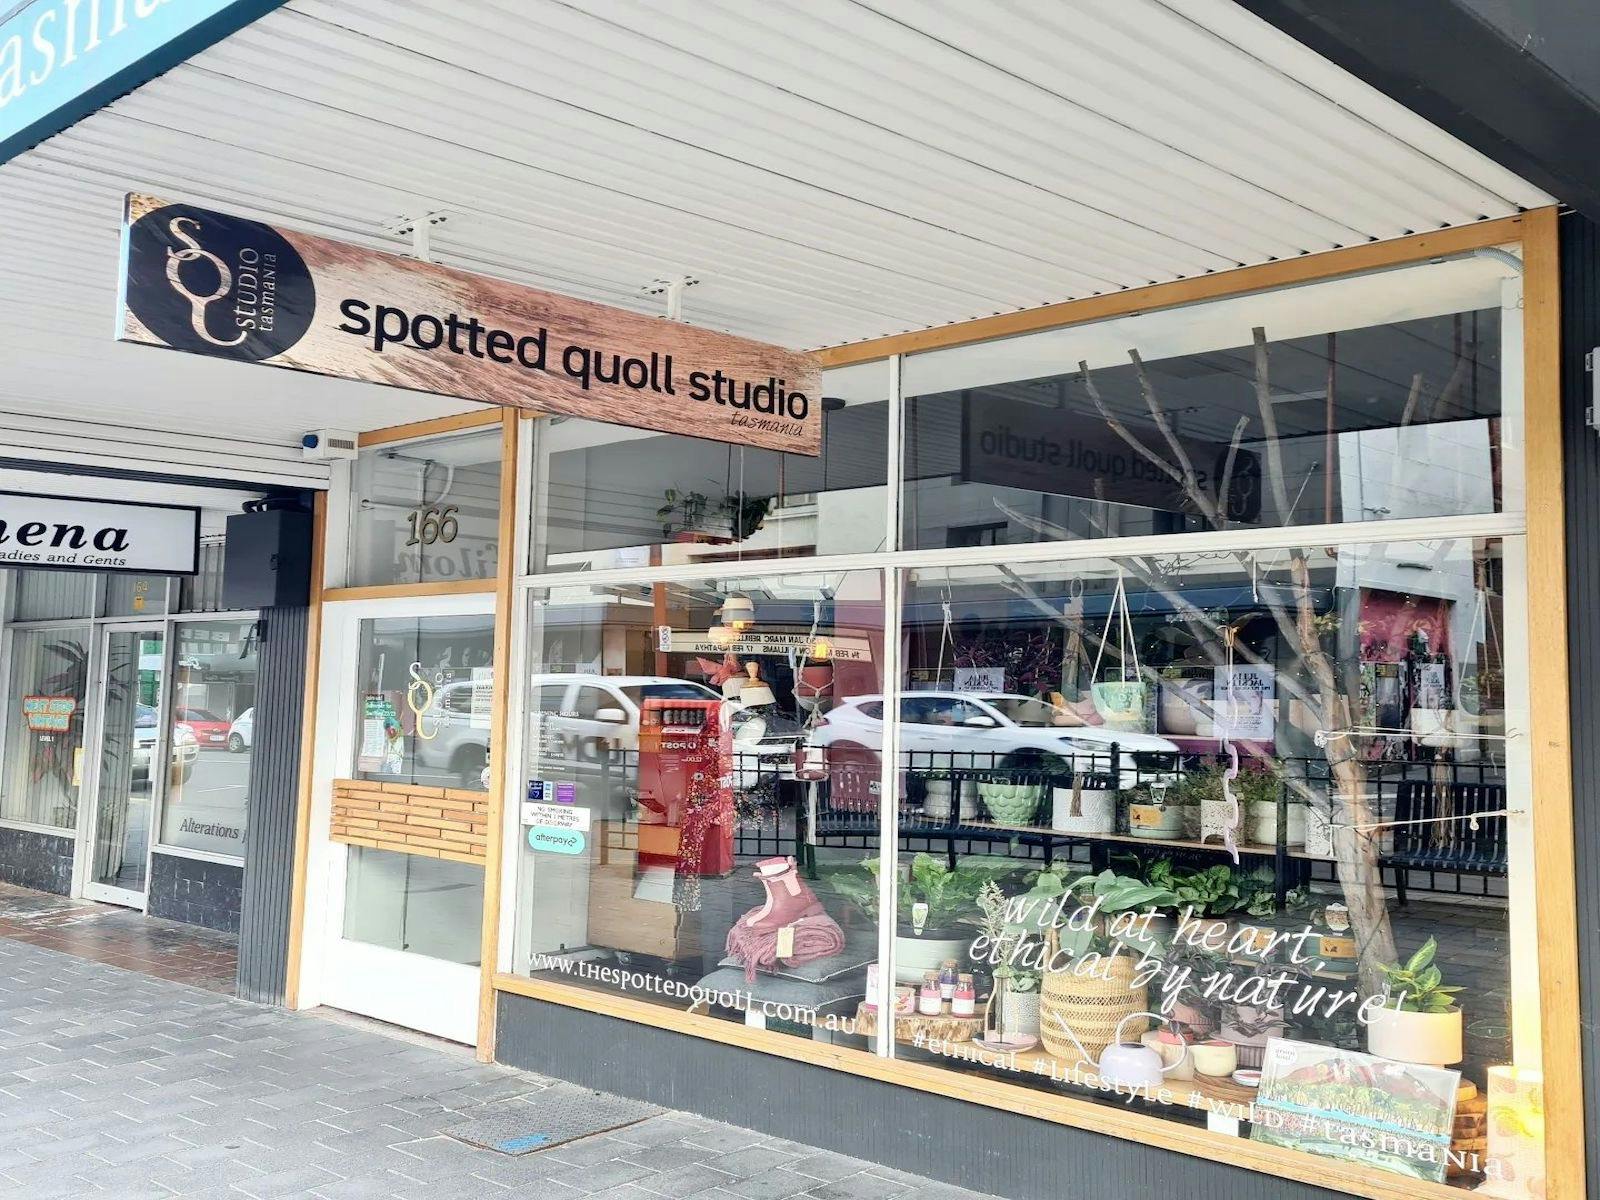 Picture showing the storefront from the street.